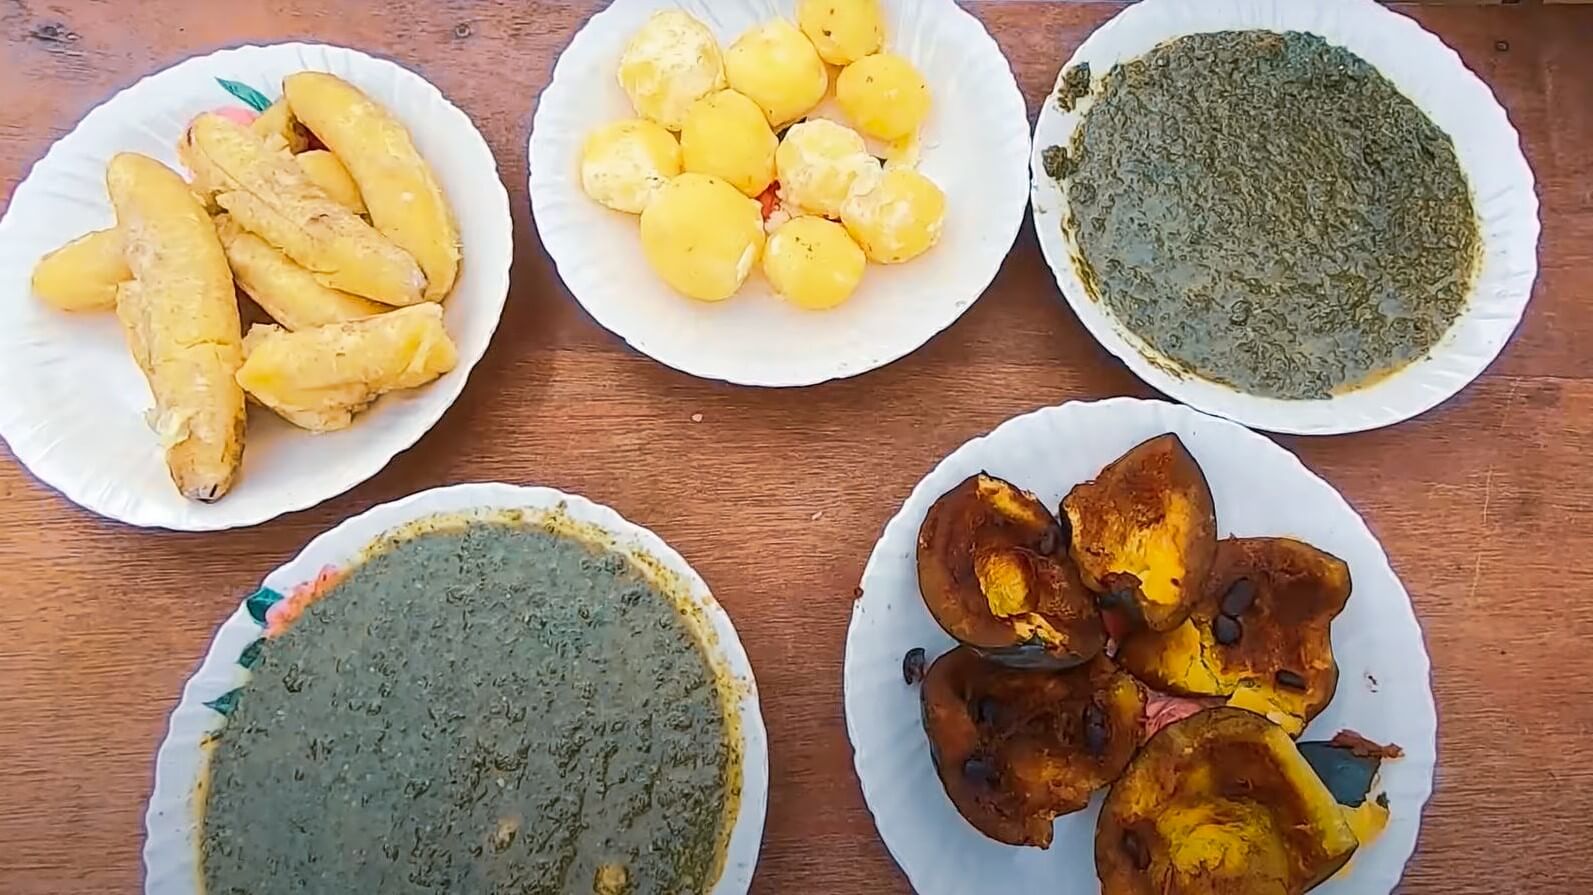 22 Food in Rwanda : Dishes, Drinks, Snacks, Desserts, a Beer! and more